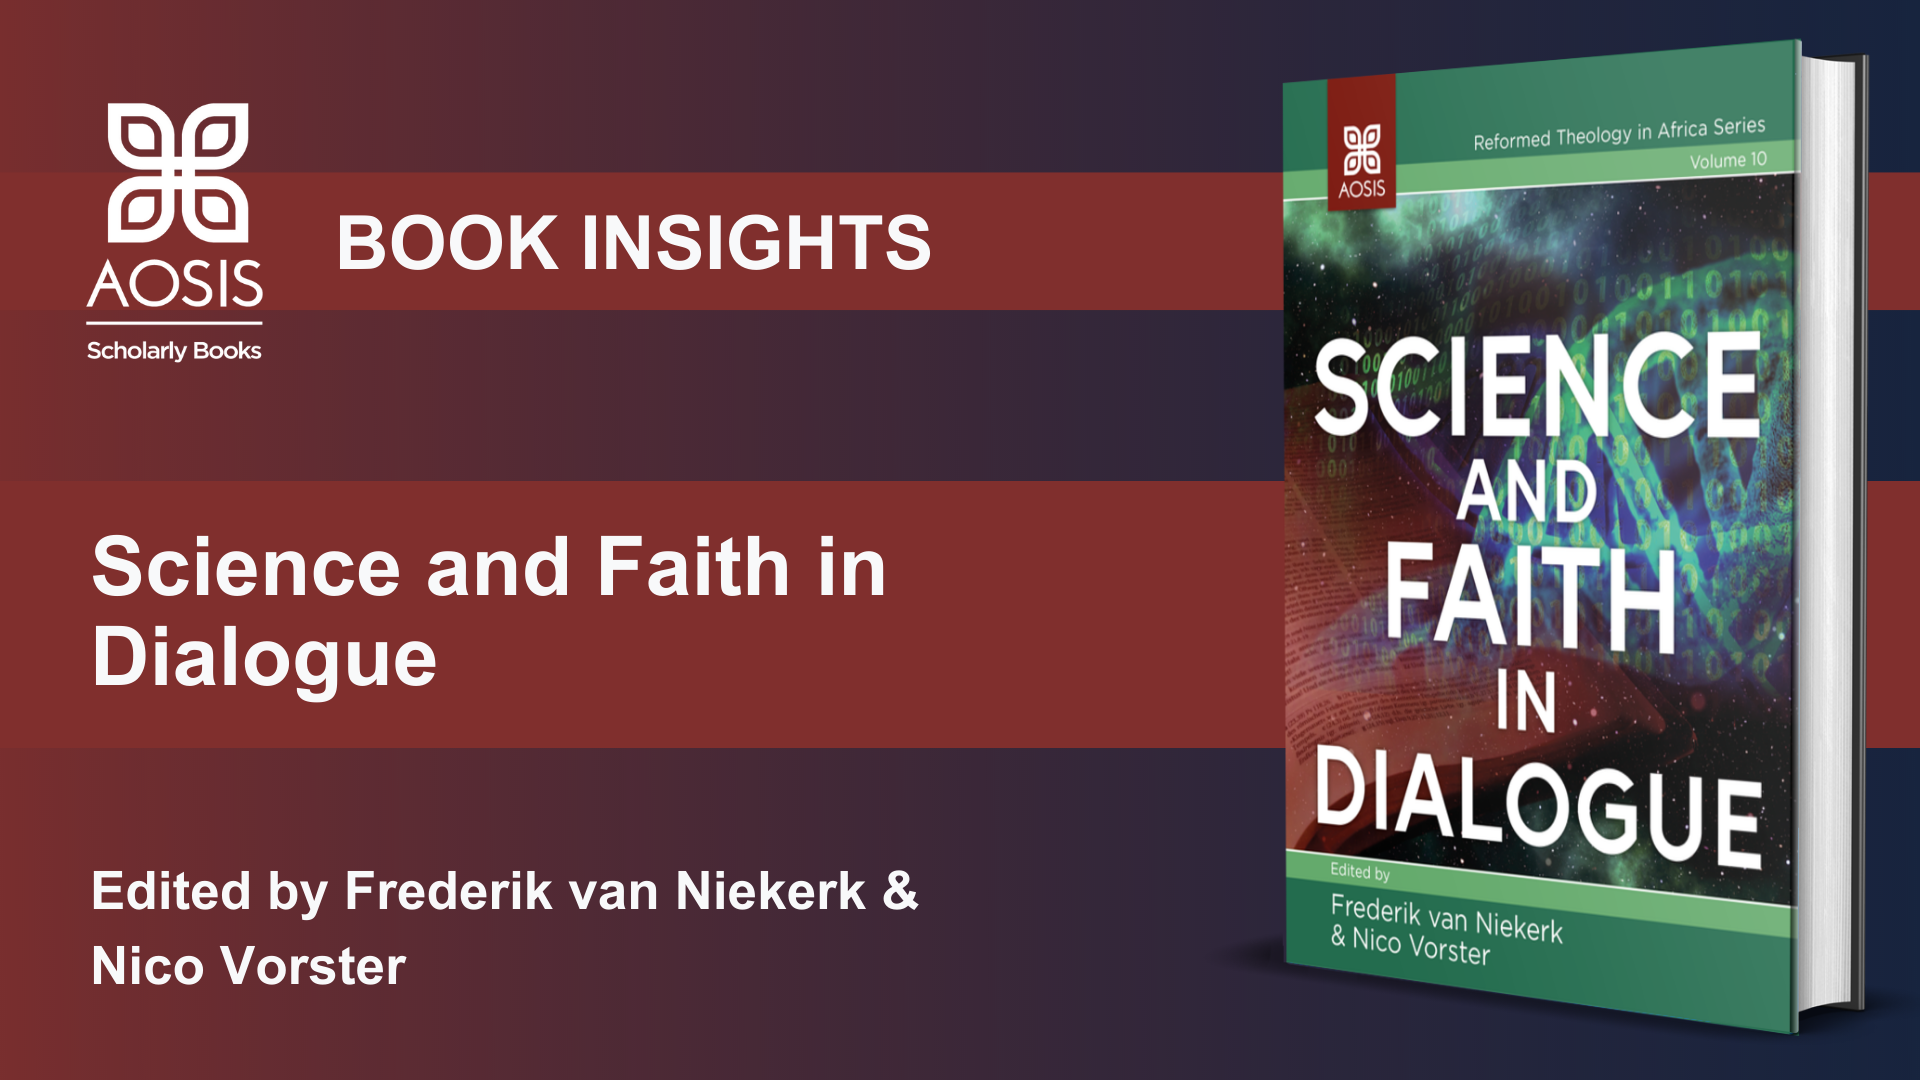 AOSIS Releases the New Book: Science and Faith in Dialogue